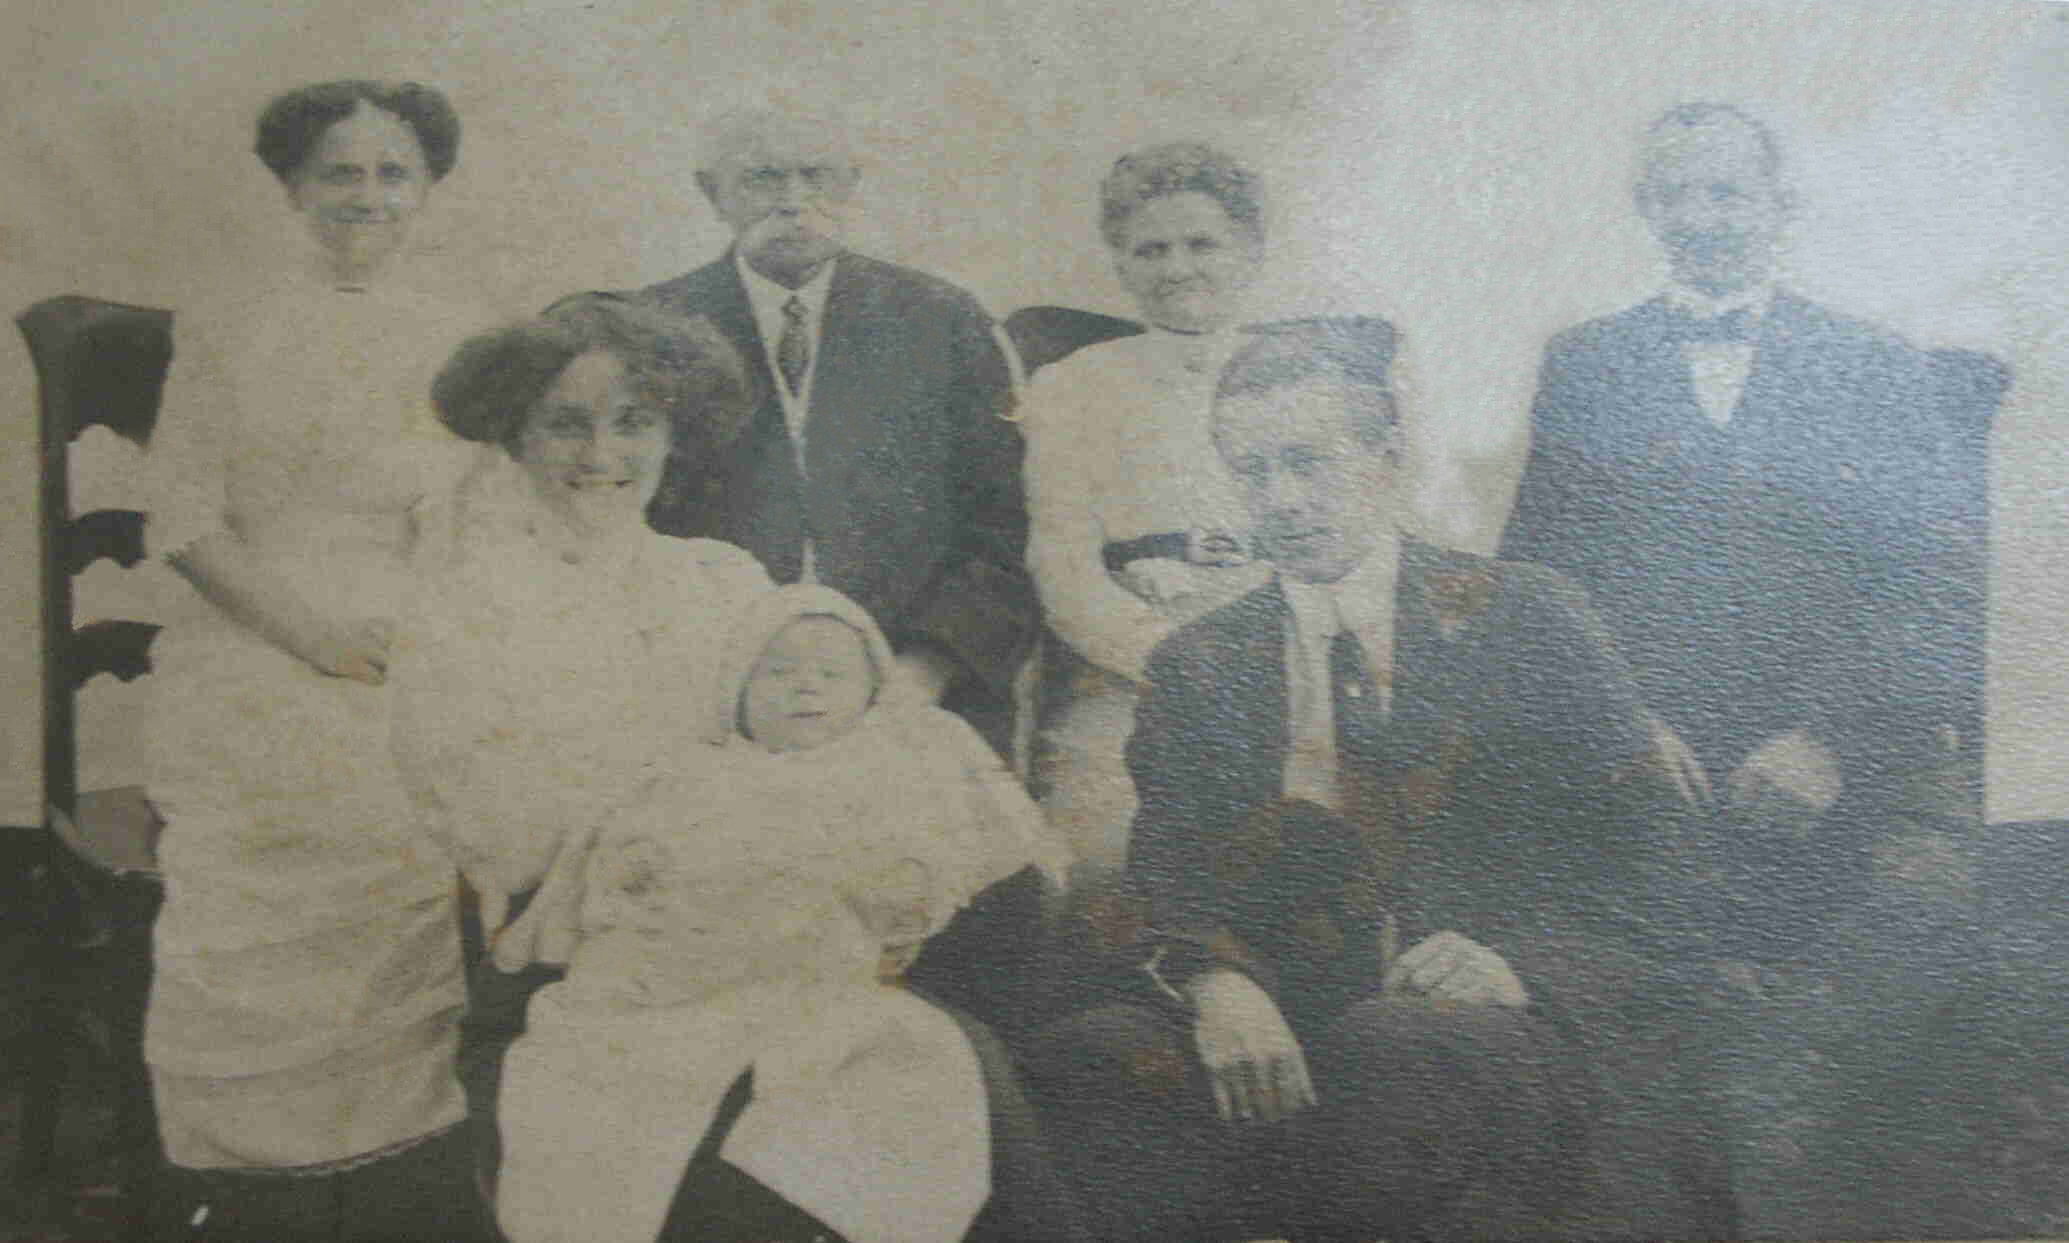 {}{Charles Taylor Fisk con sus Padres y Abuelos 1913};{@Date:1913};{@Place:Brookline};{ Boston};{ MA};{@Author:Clarence Fisk ll       Modified: April 11};{2019};{<> Abbie Rebecca Taylor (1871-1925)};{<> Ashton  Sparhawk Fisk Rand};{<> Burt Henry Rand (1868-1920)};{<> Maud Elvira Taylor};{<> William Francis Fisk Sparhawk};{Charles Taylor Fisk Rand};{Clarence Ames Fisk Sparhawk};{Florence Abbie Rand Taylor};{Frank L. Taylor};{Nellie Jenny de Taylor};{eTg};{Recibió};{Maude};{Florence};{Clarence};{Honey Teddy};{Registra};{William Francis};{Francis  1878-1914};{Clarence Ames};{“Libro Bebé”};{1913-14};{Florence Abbie Rand};{Franklin  NH};{Henry Rand};{Abbie Rebecca Taylor};{Ashton Sparhawk};{Sparhawk  1916-1990};{Parte Matrimonio};{Matrimonio Clarence};{Clarence Florence};{ACLARACIÓN JULIO 2018};{Cuando};{FotoRelato};{Florence  Burt};{Henry Abbie};{Acabamos};{Cementerio Riverdale};{Frank L Taylor};{Nellie Jenny};{Henry 45};{Abbie 42};{TRANSLATION};{Grandmother Florence Abbie};{Charles Taylor};{Spanish  “Take};{March 23};{August 1914};{Henry Burt Rand};{Rebecca Abbie Taylor};{Three};{Grandfather Clarence};{[ATHR]Clarence Fisk ll        Modified: April 11,2019